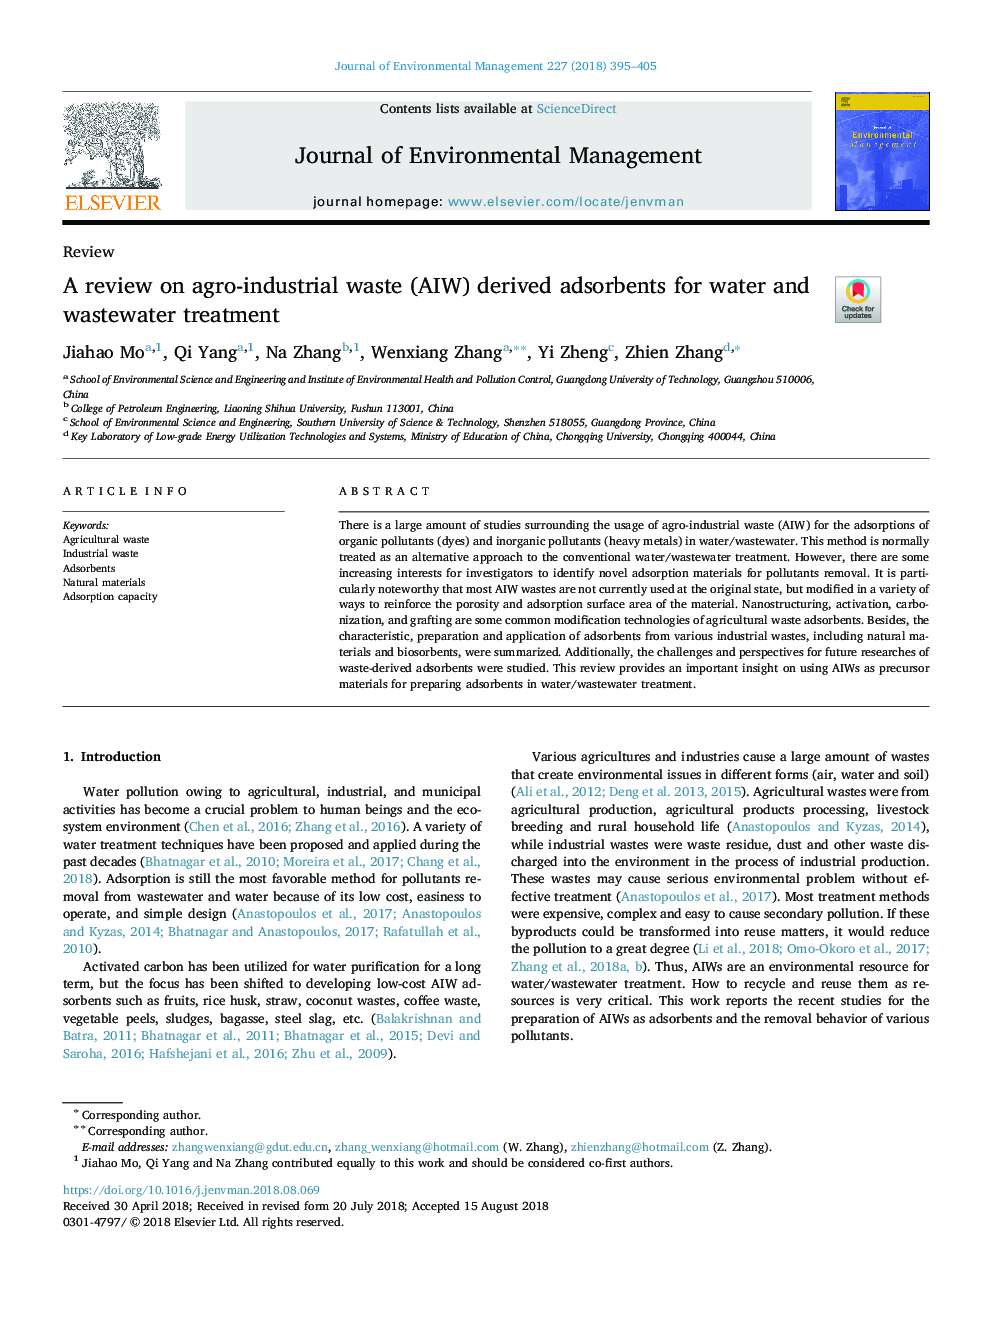 A review on agro-industrial waste (AIW) derived adsorbents for water and wastewater treatment